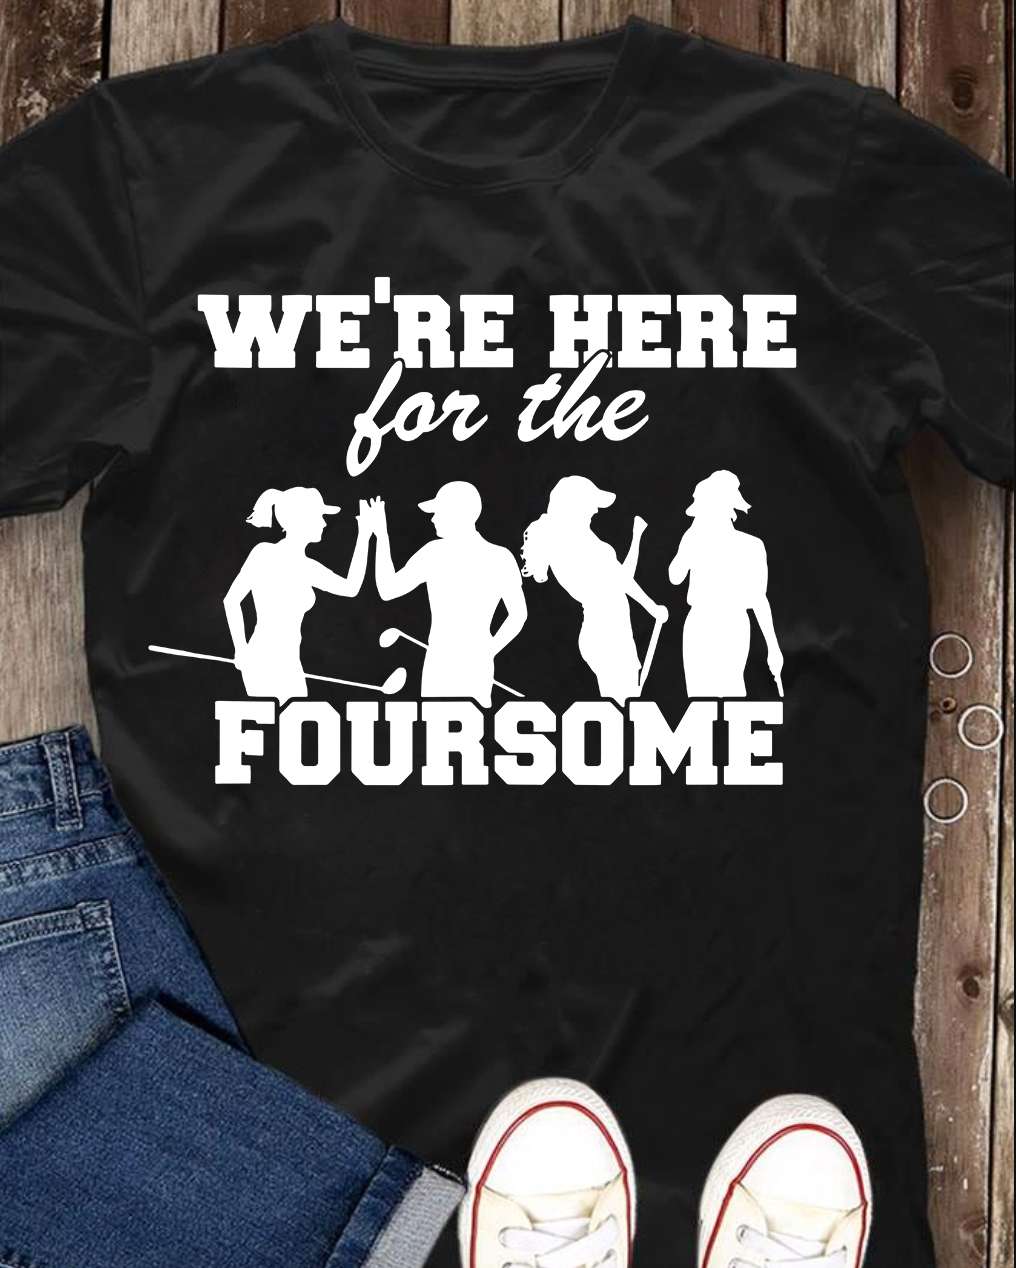 We're here for the foursome - Foursome golfer, love playing golf